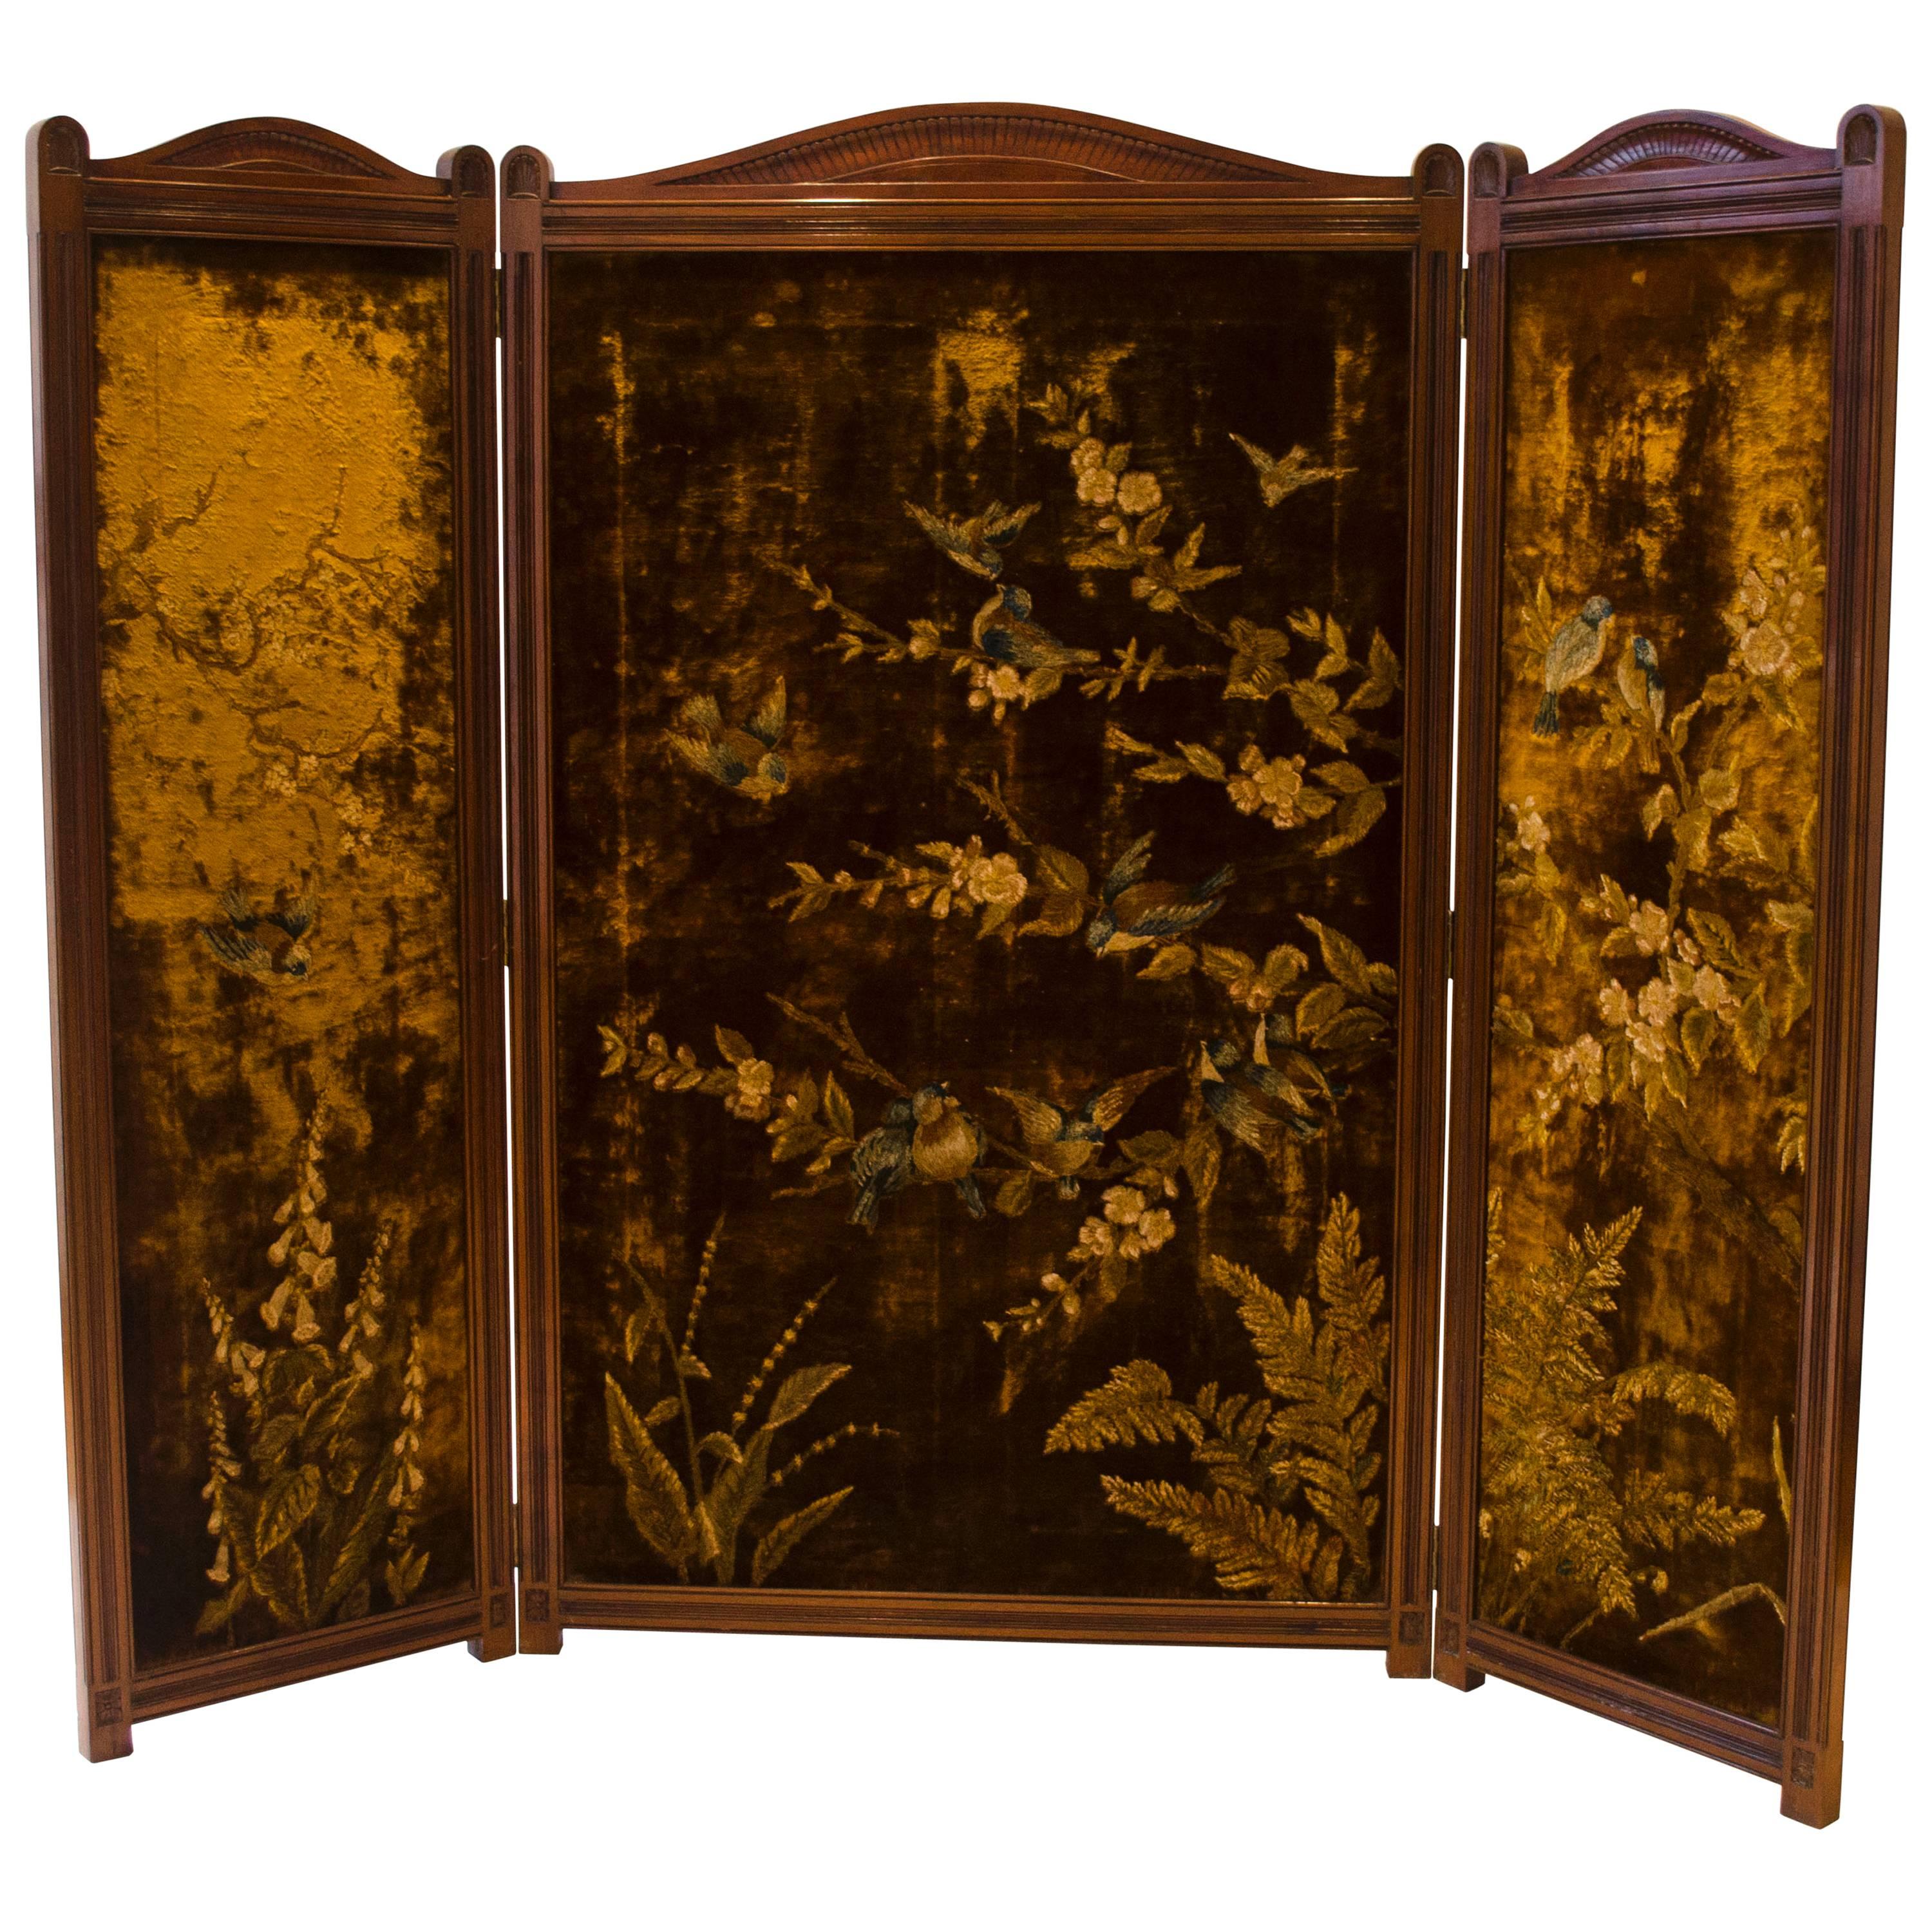 Gillows attr, An Aesthetic Movement Three-Fold Screen with Birds Amongst Blossom